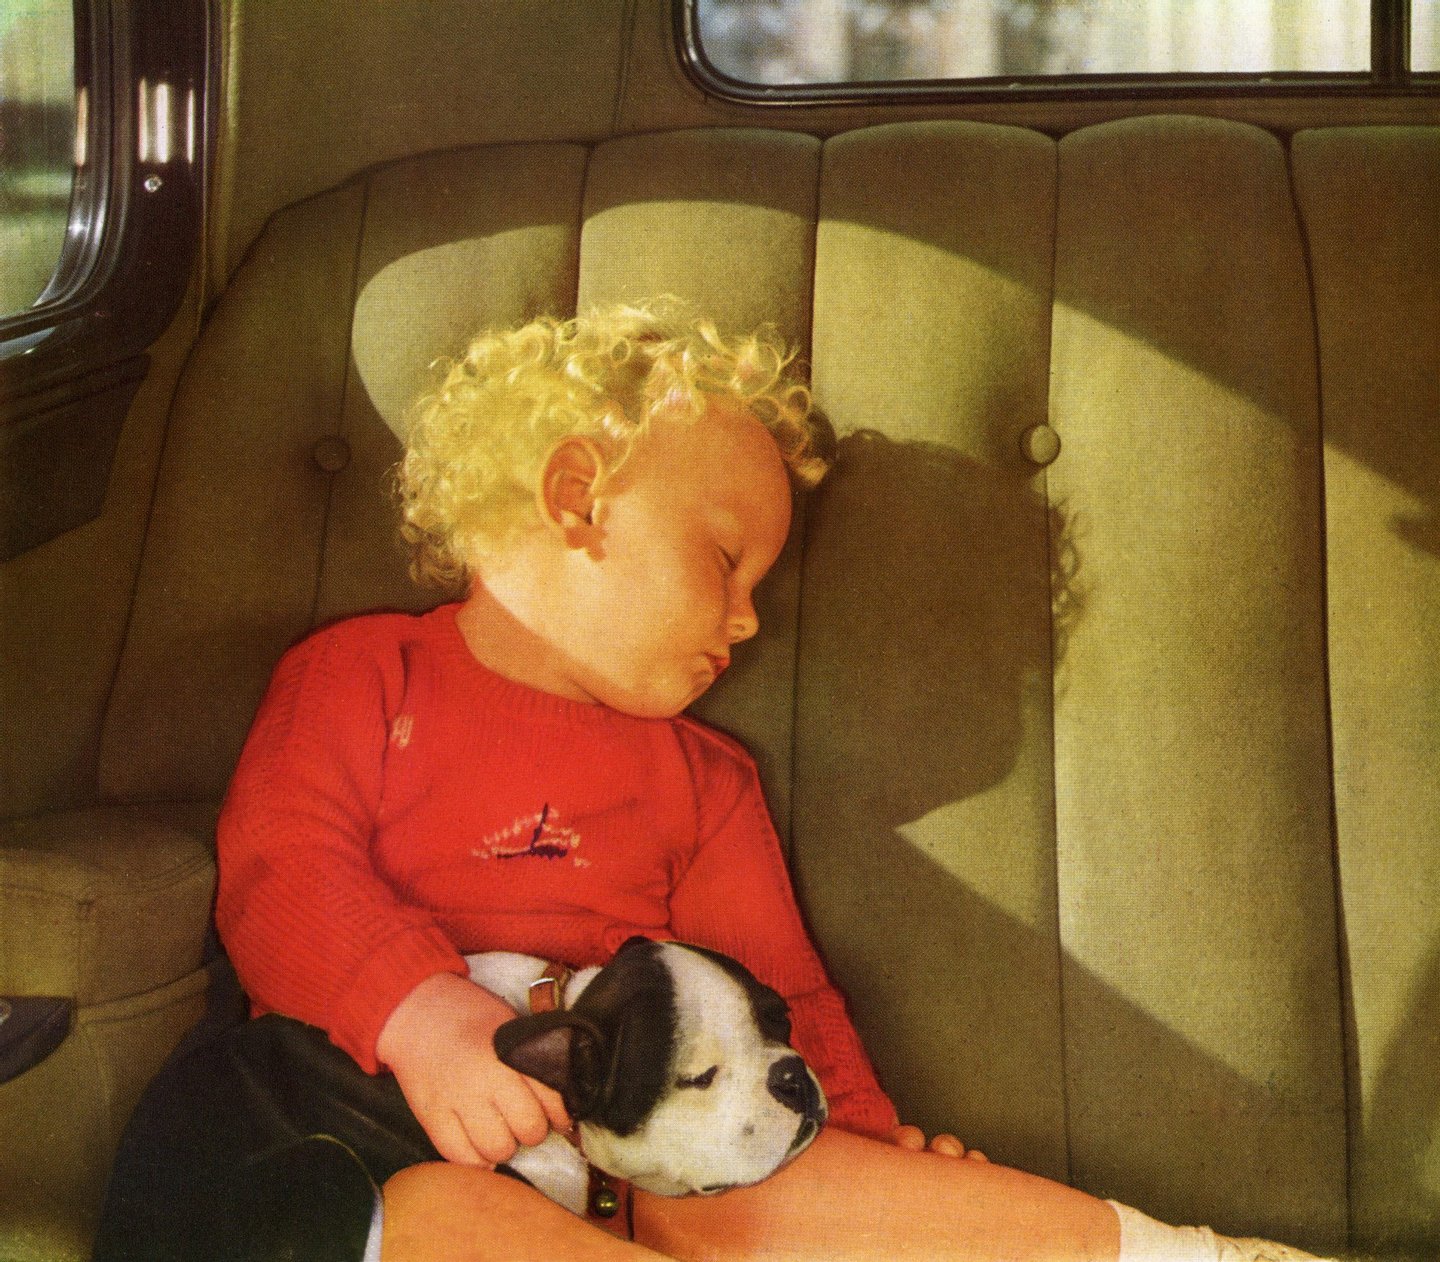 Vintage illustration of a blond little boy sleeping with his dog in the back seat of a car, 1930s. Screen print. (Illustration by GraphicaArtis/Getty Images)